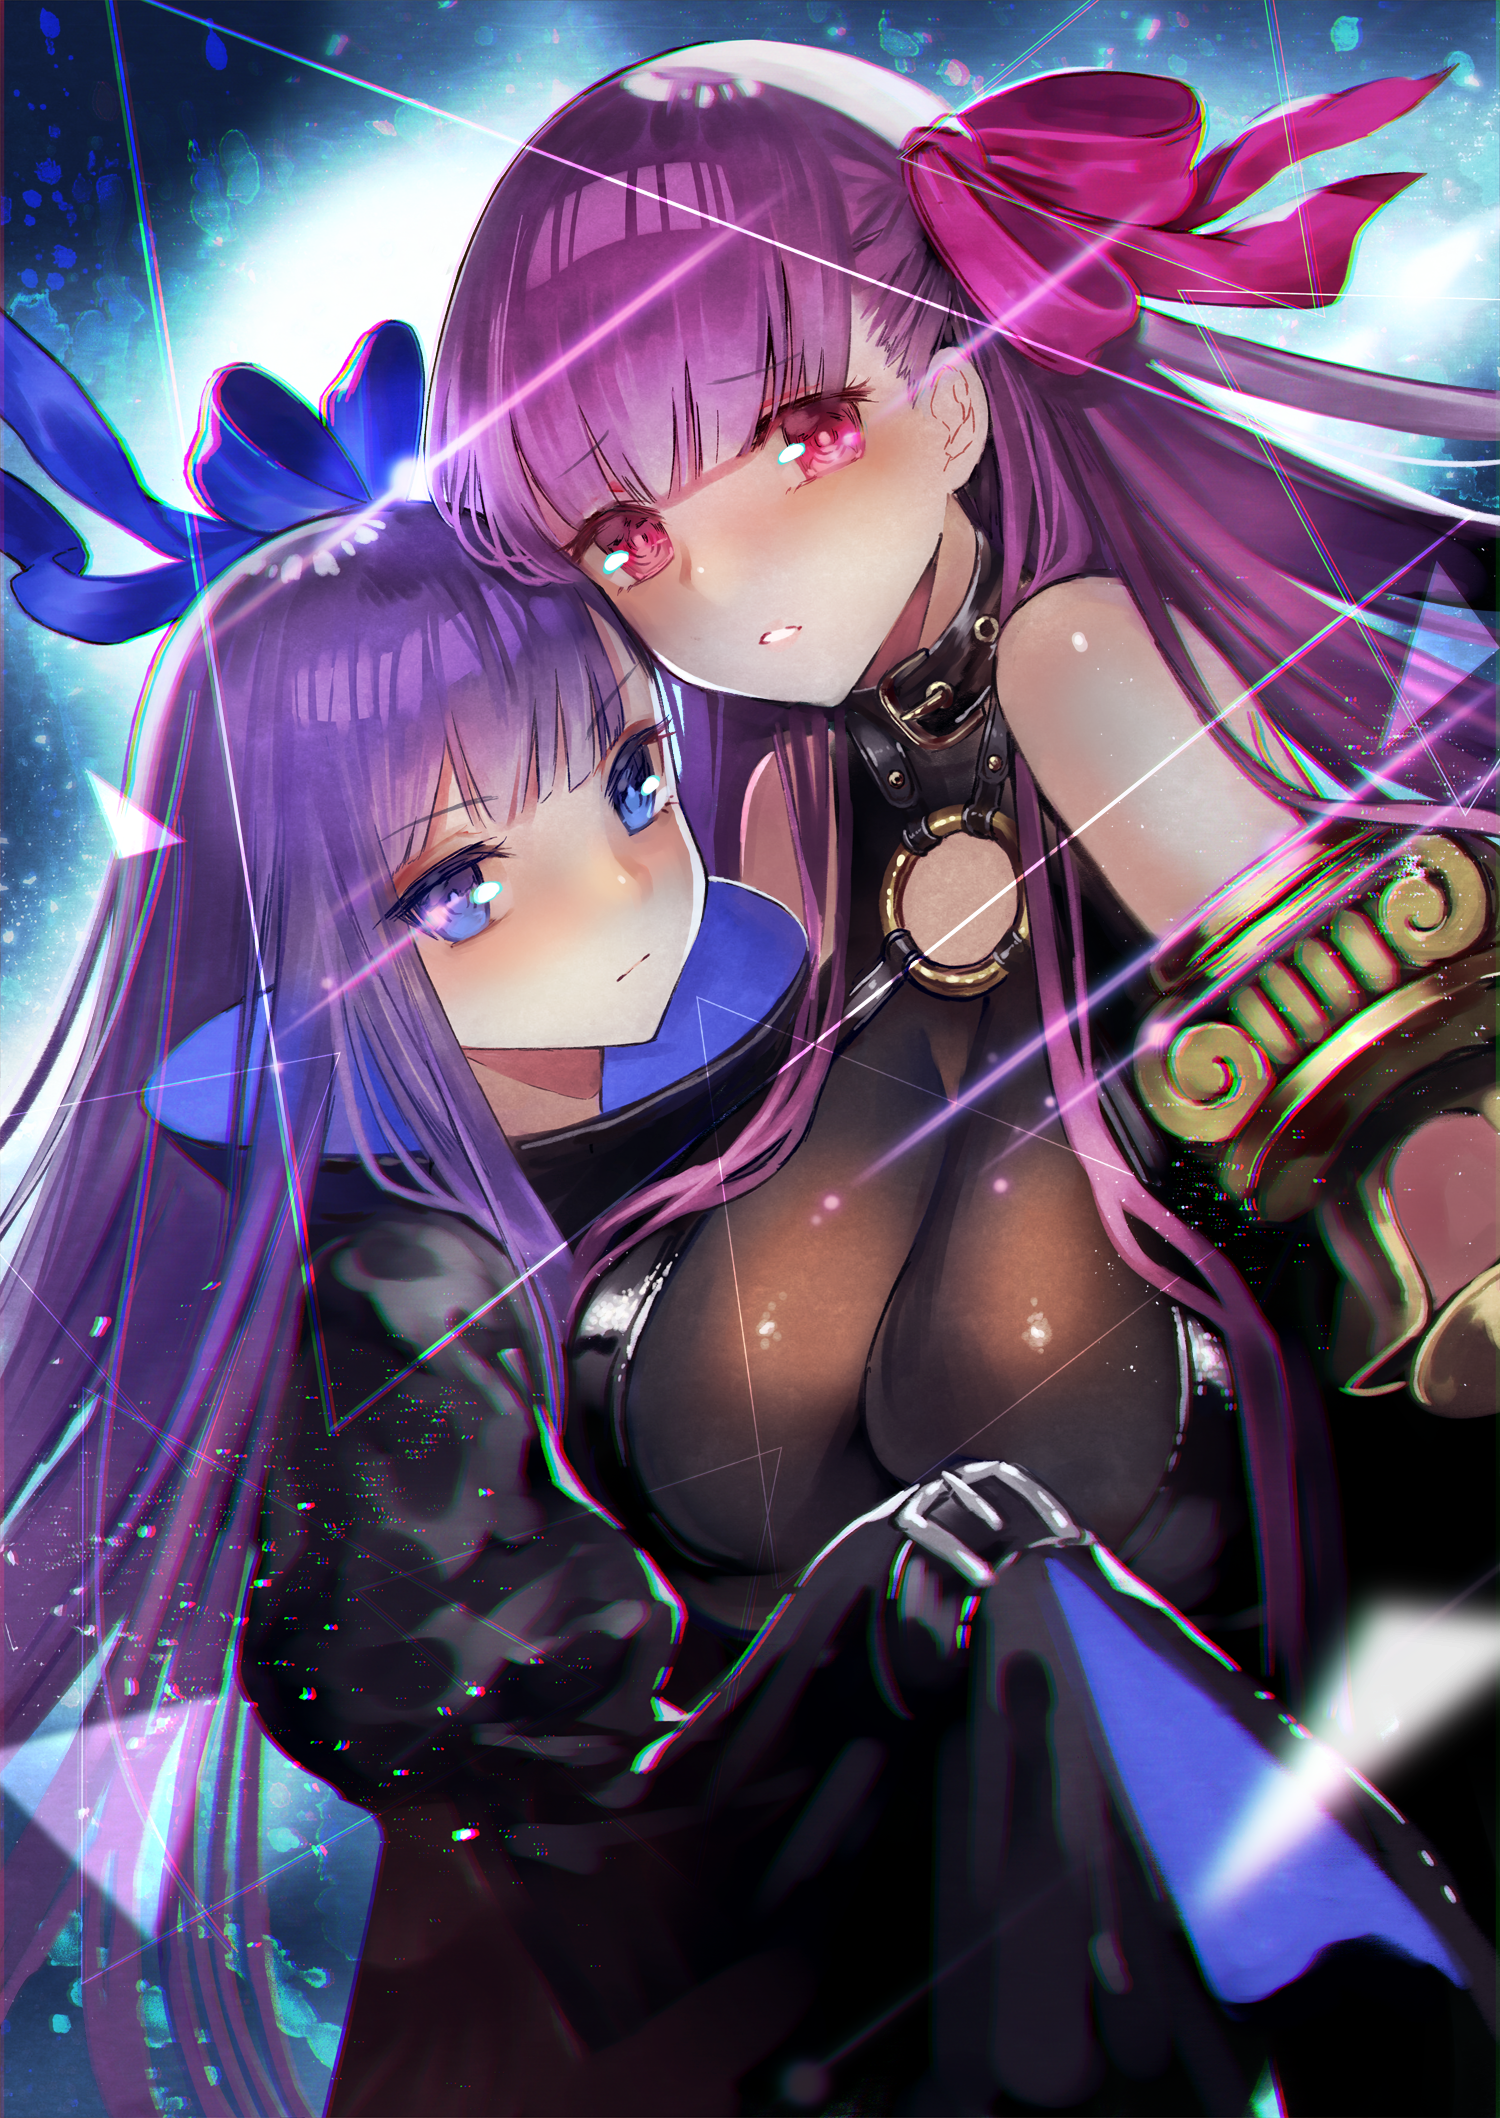 Anime 1500x2118 anime anime girls Fate series Fate/Extra CCC Fate/Grand Order two women sisters Meltlilith Passionlip long hair purple hair artwork digital art fan art